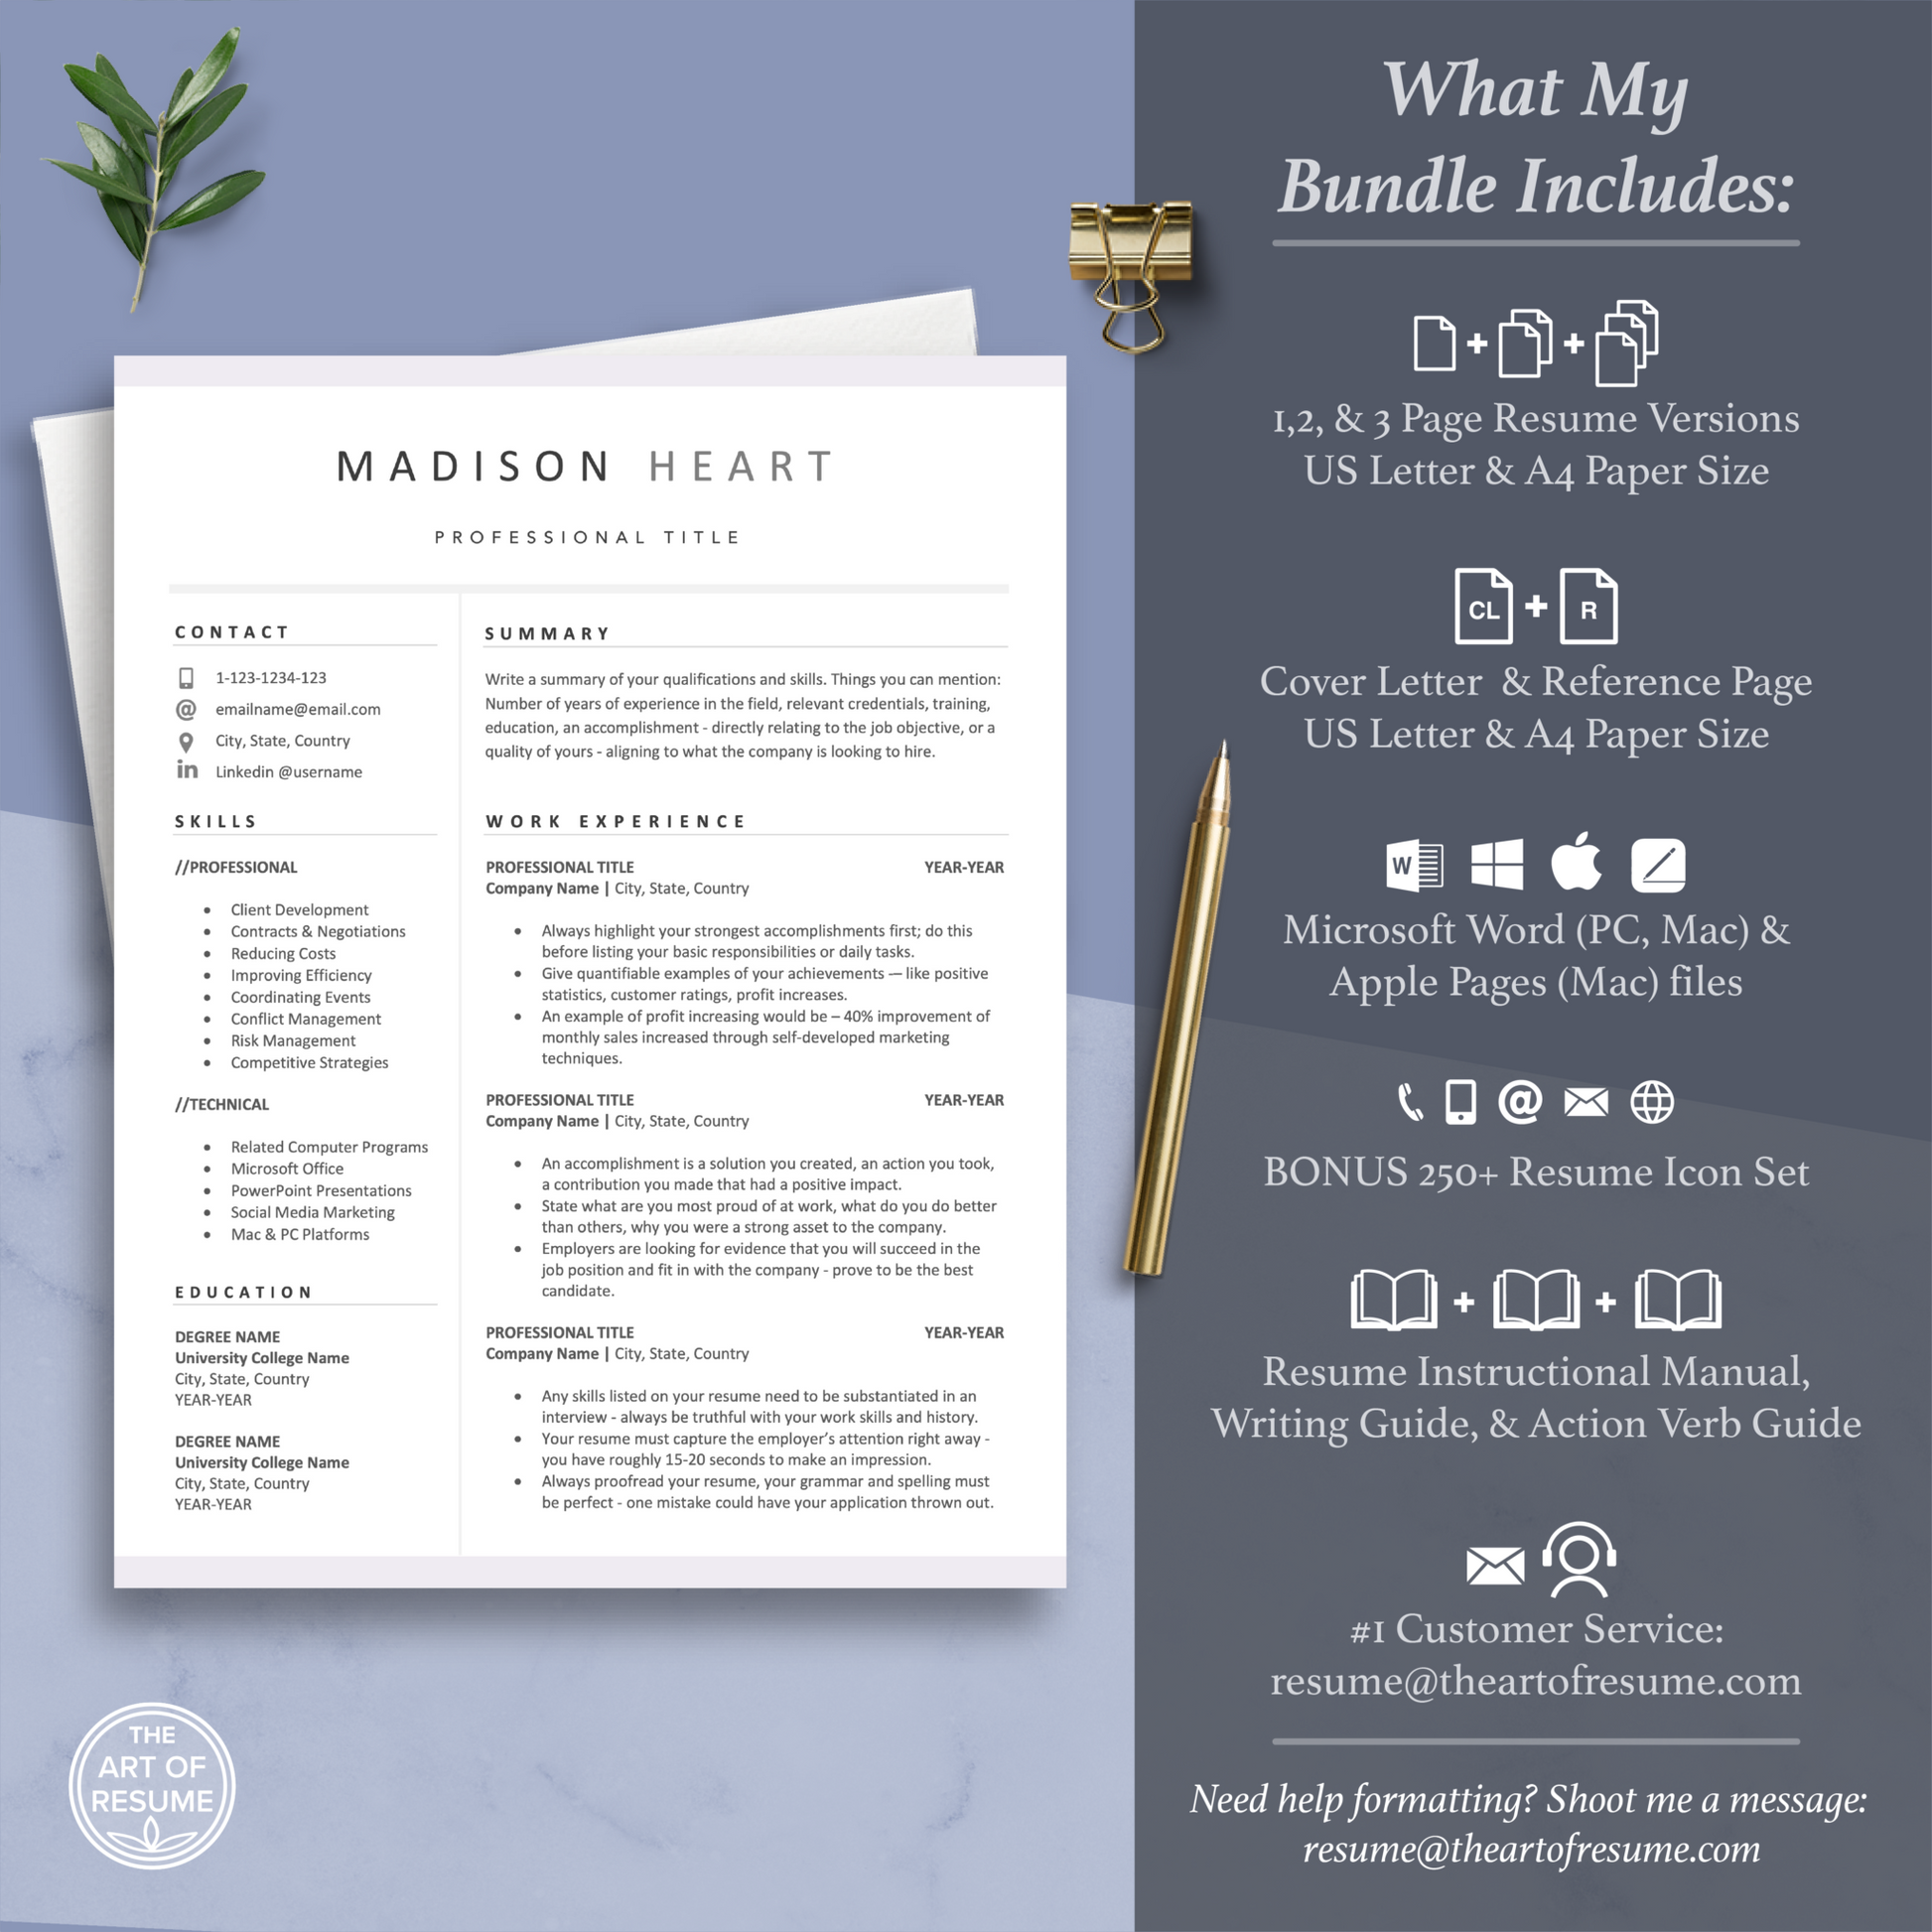 The Art of Resume | What is included in your resume bundle builder download